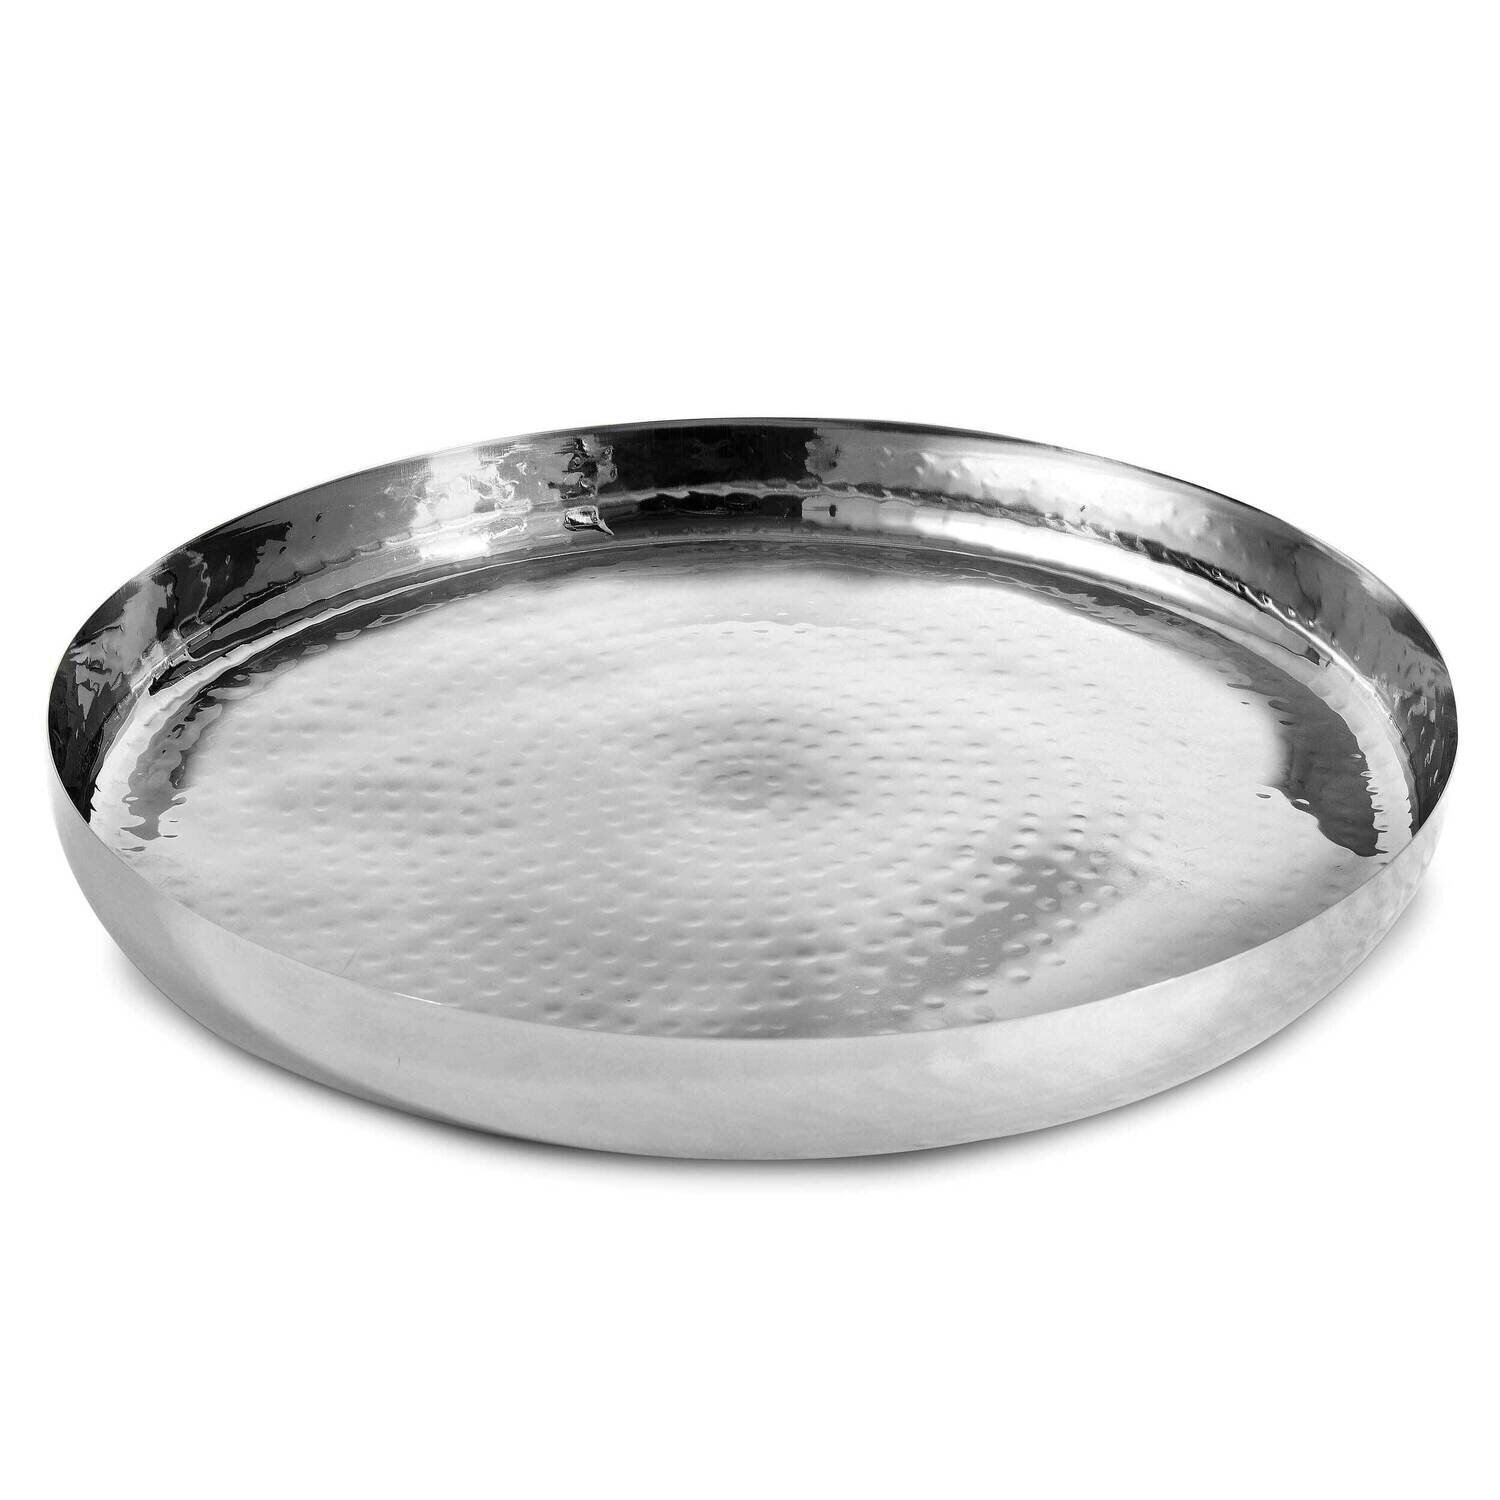 Hammered Stainless SteelLarge Round Tray GM22343